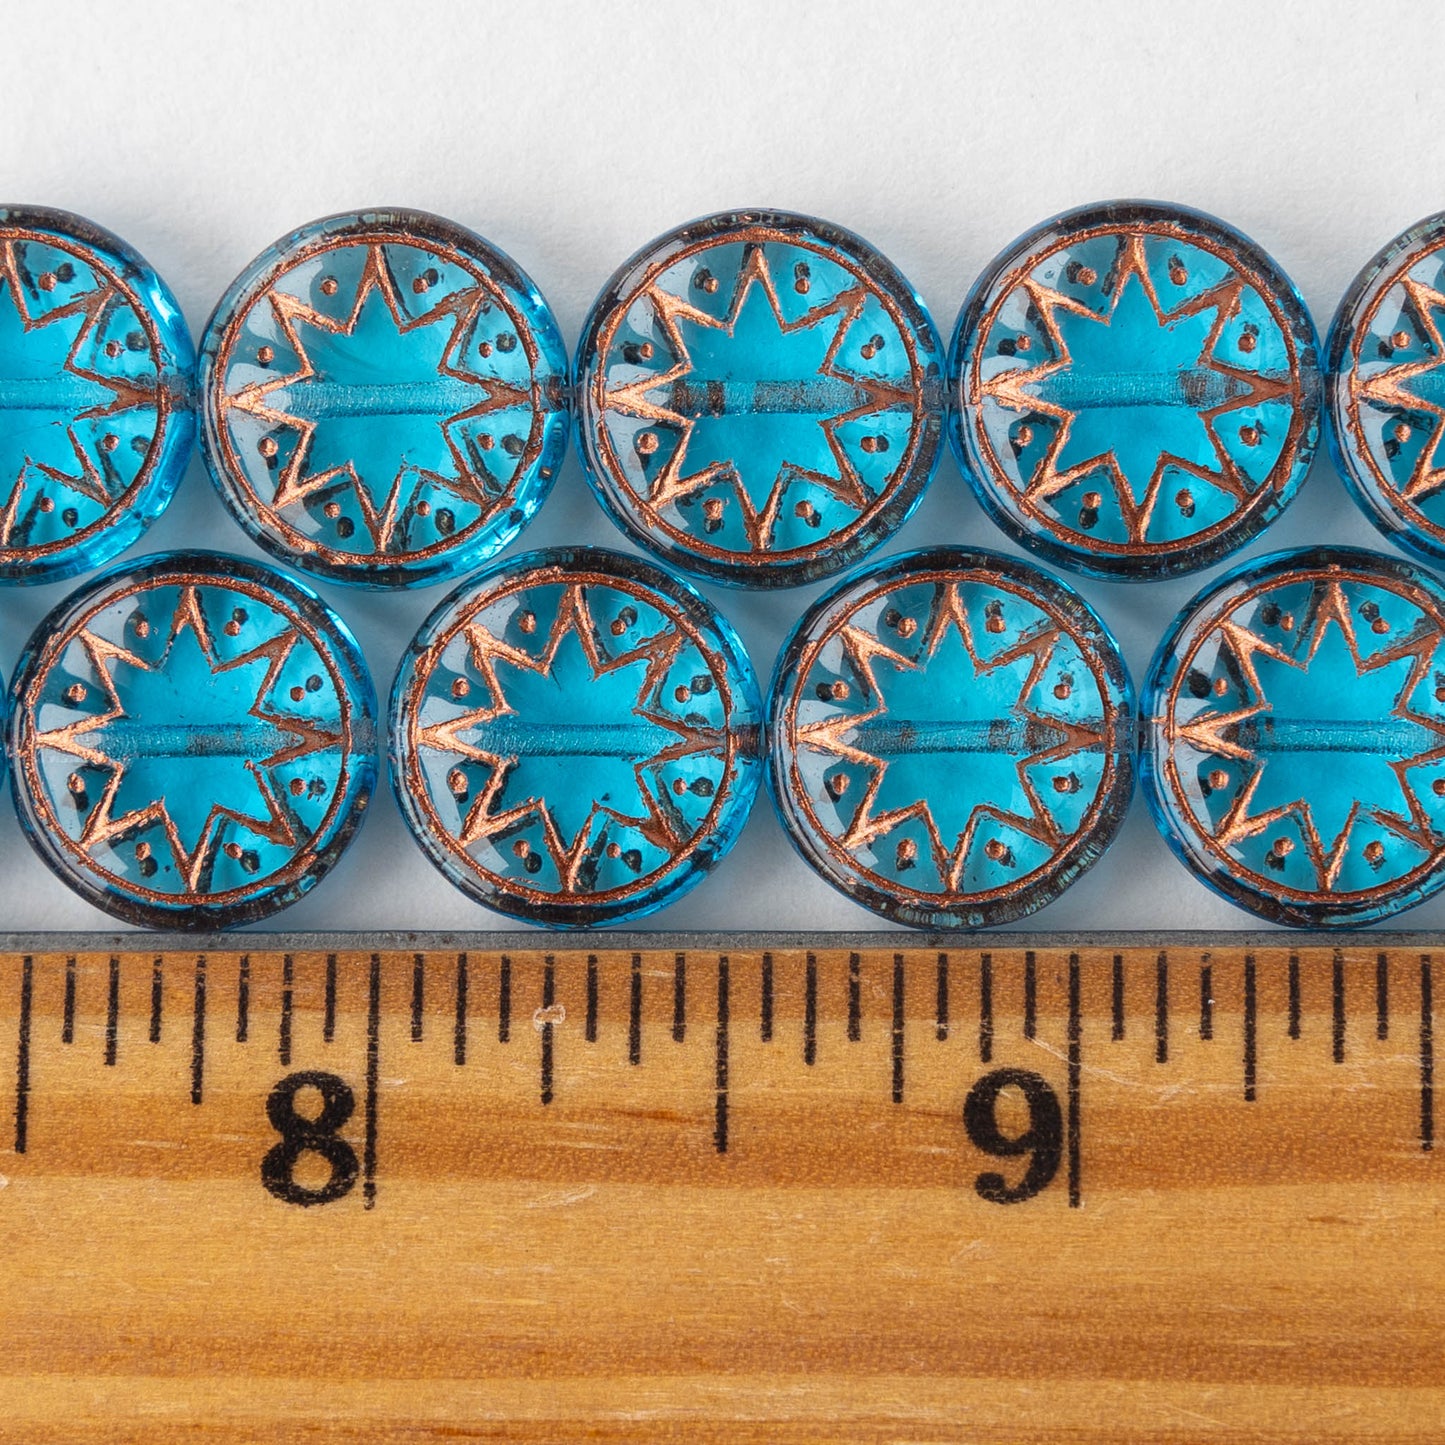 13mm Star Of Ishtar - Teal with Copper Wash  - Choose Amount